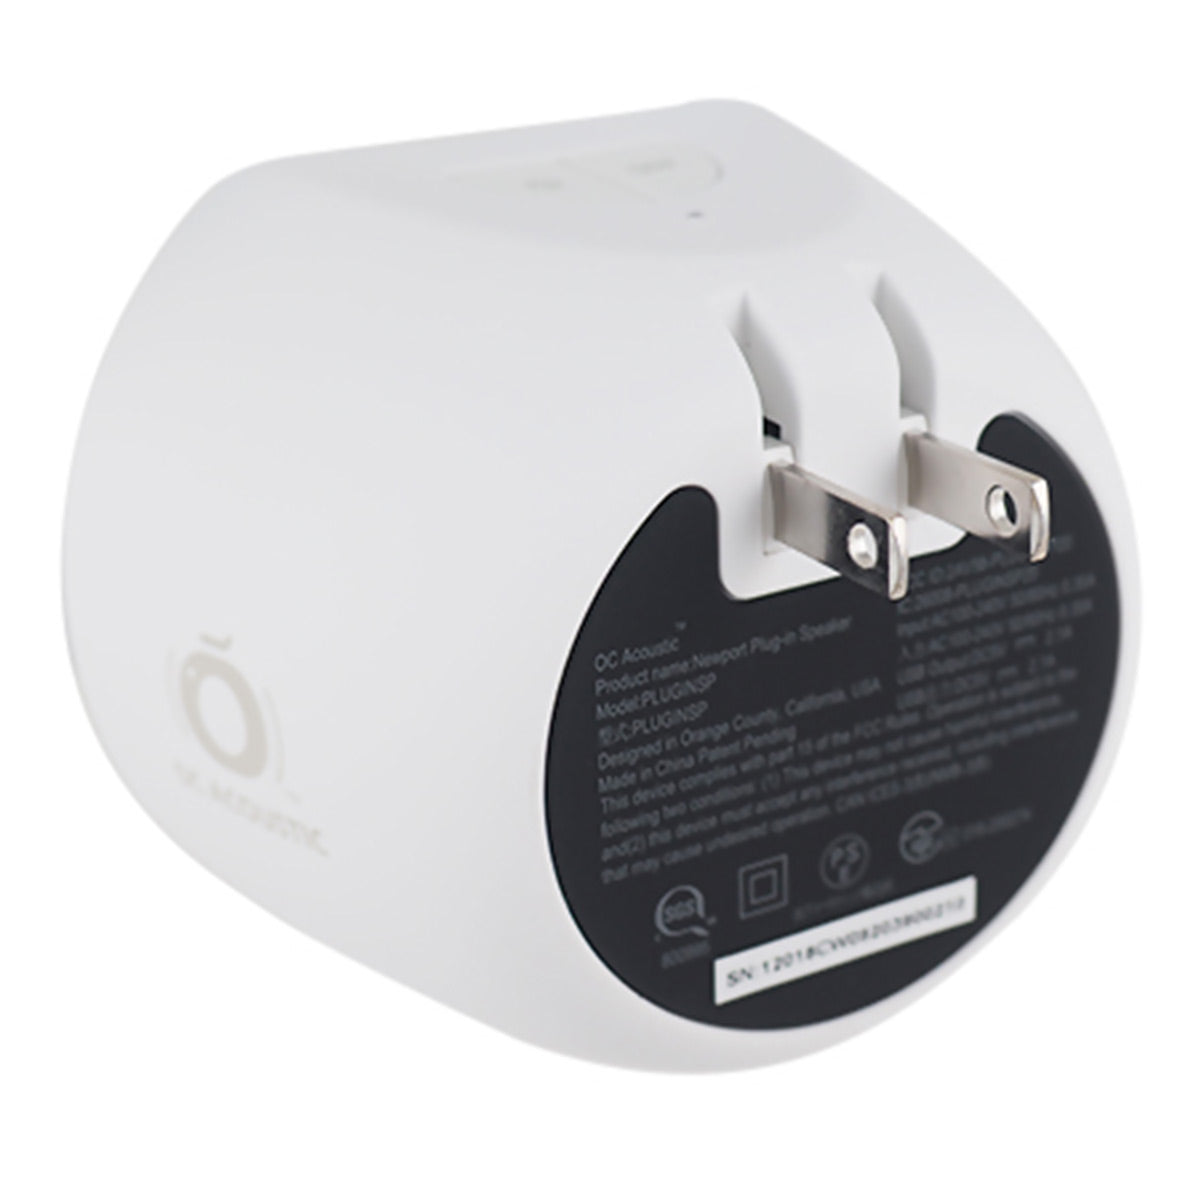 OC Acoustic Newport Plug-in Outlet Speaker with Bluetooth 5.1 and Built-in USB Type-A Charging Port (Champagne/White)